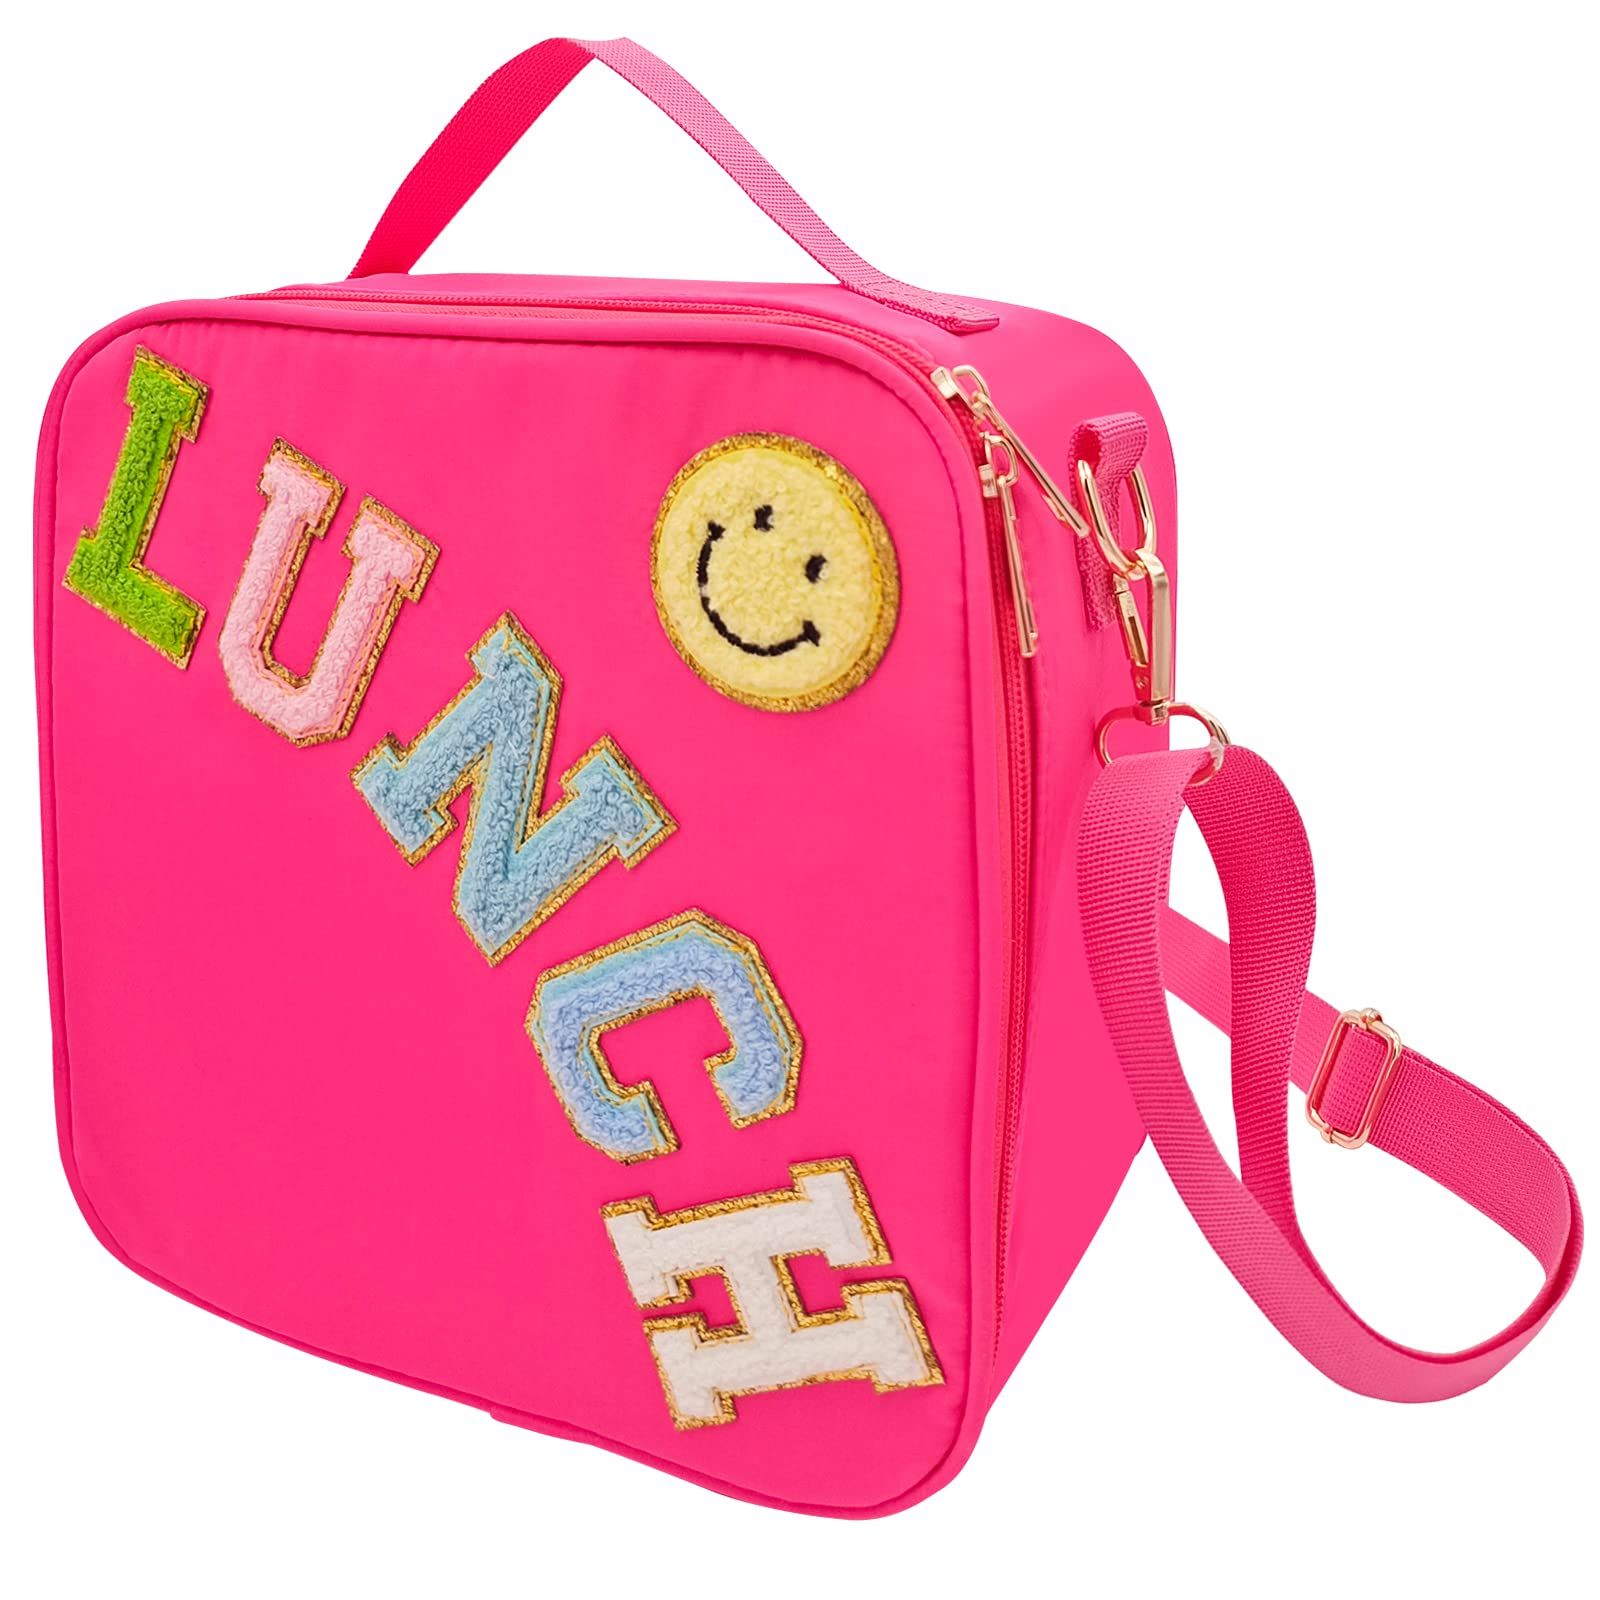 Insulated Lunch Box for Women | Lunch Bags for Women, Girls, Teens | Cute  Lunch Tote Purse Cooler for School, Work, Office, Adult - Walmart.com